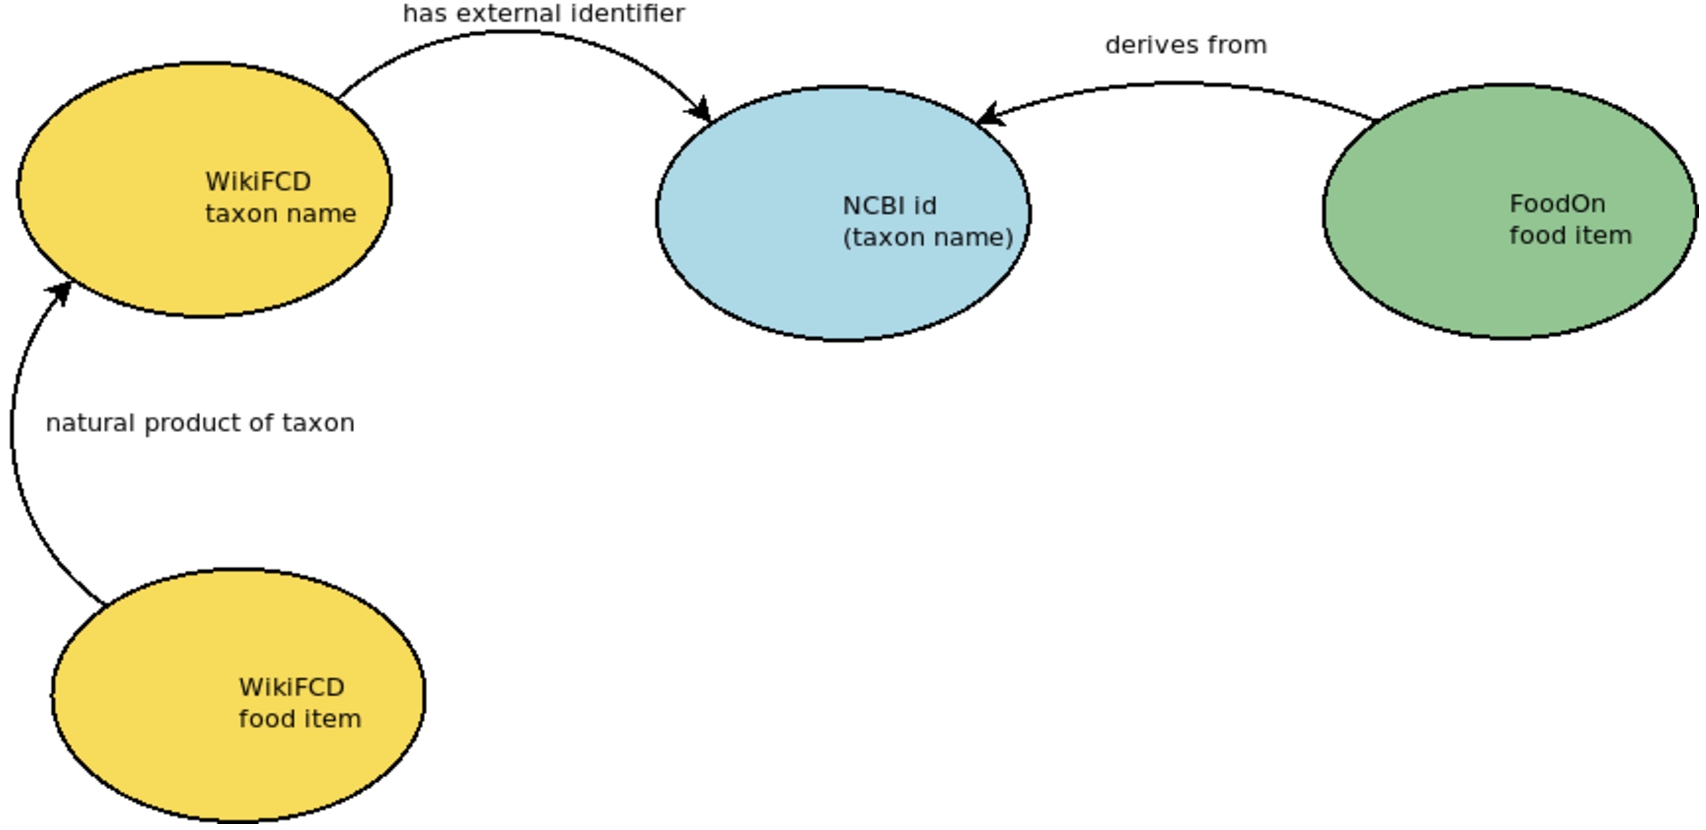 NCBI taxon identifiers are used to align food items in WikiFCD and FoodOn.